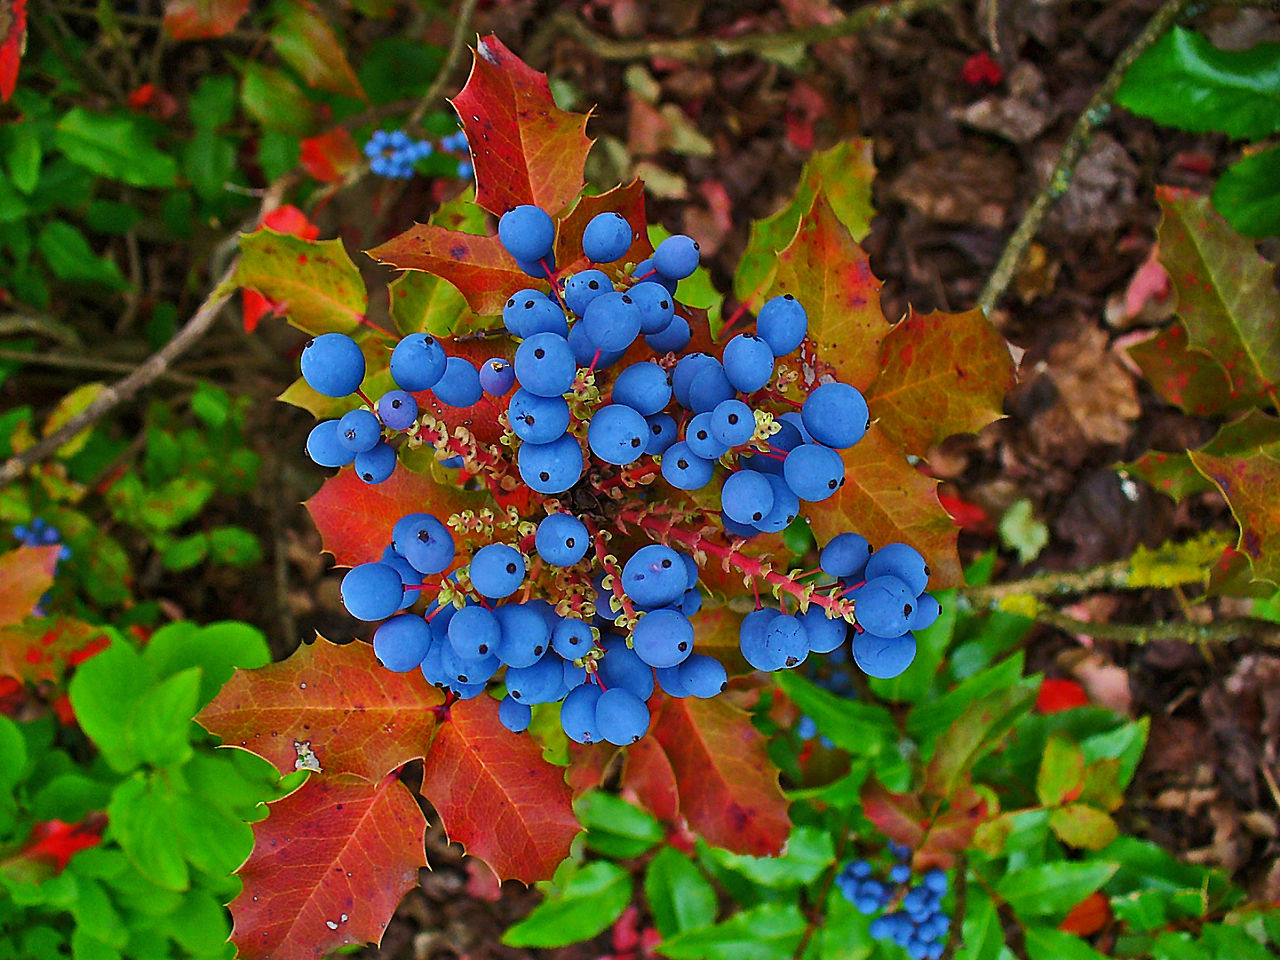 Cluster of small bright blue berries with red foliage behind them and green foliage farther behind them.